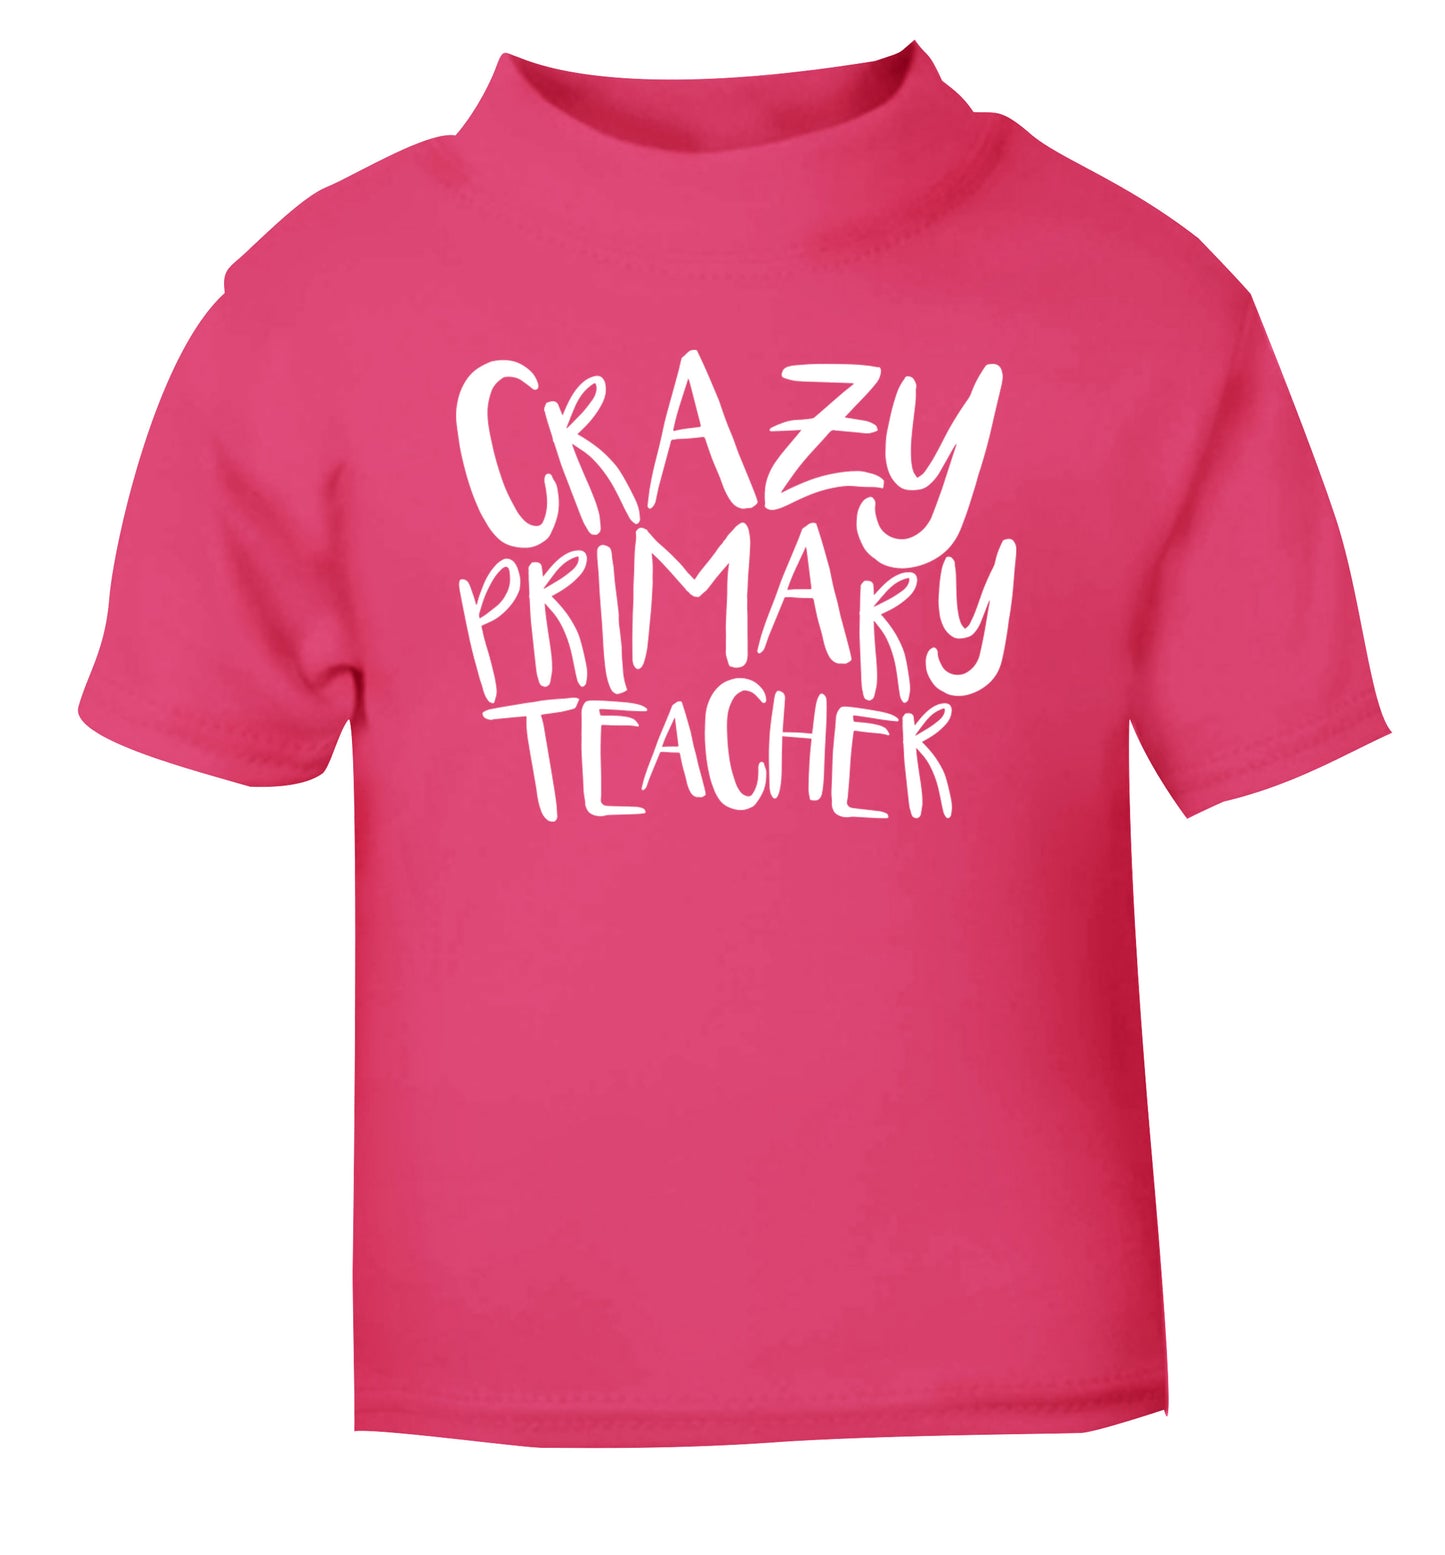 Crazy primary teacher pink Baby Toddler Tshirt 2 Years